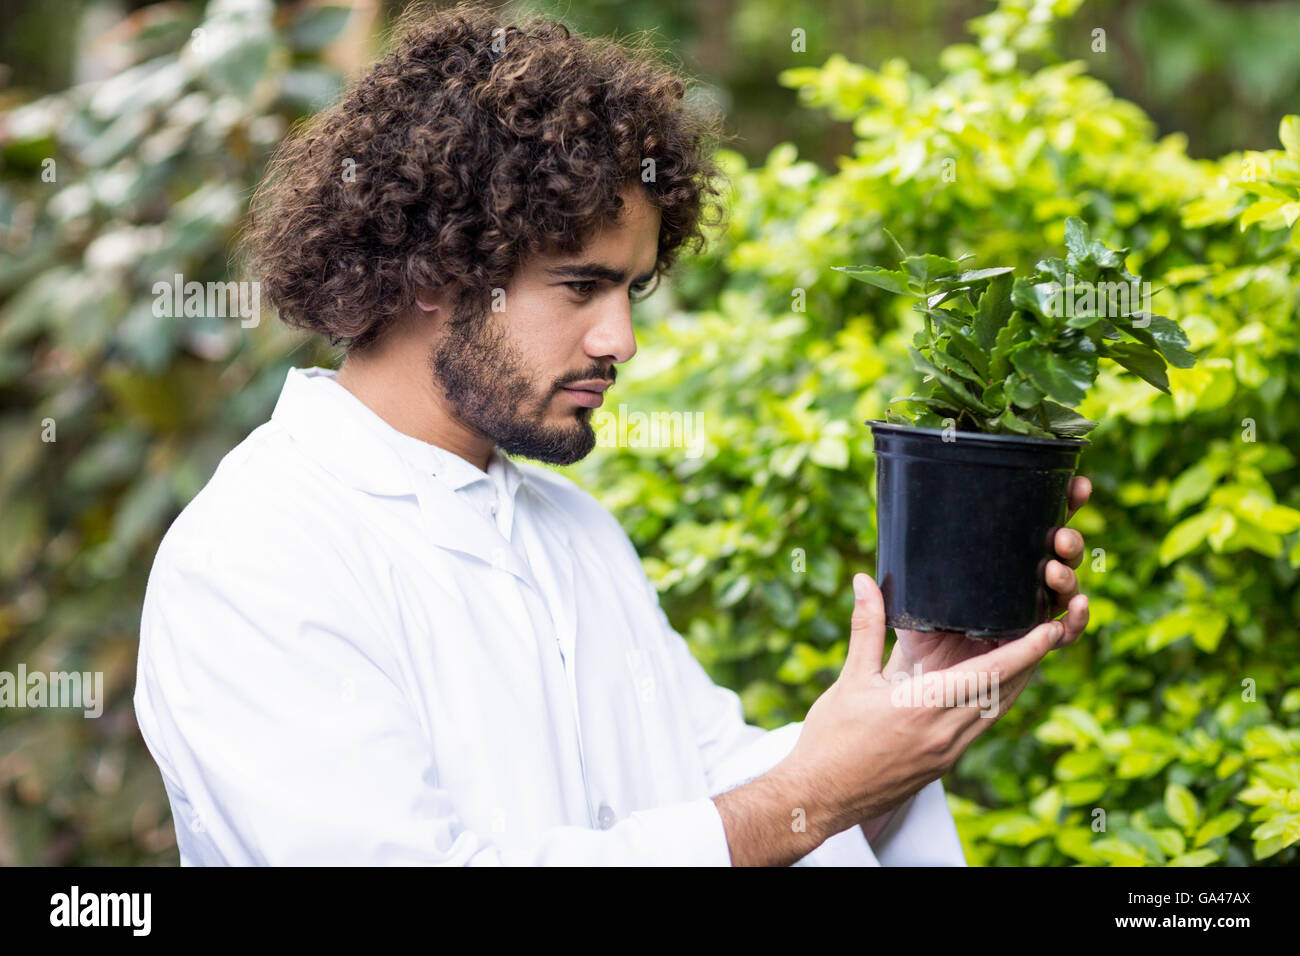 Male scientist examining potted plant Stock Photo